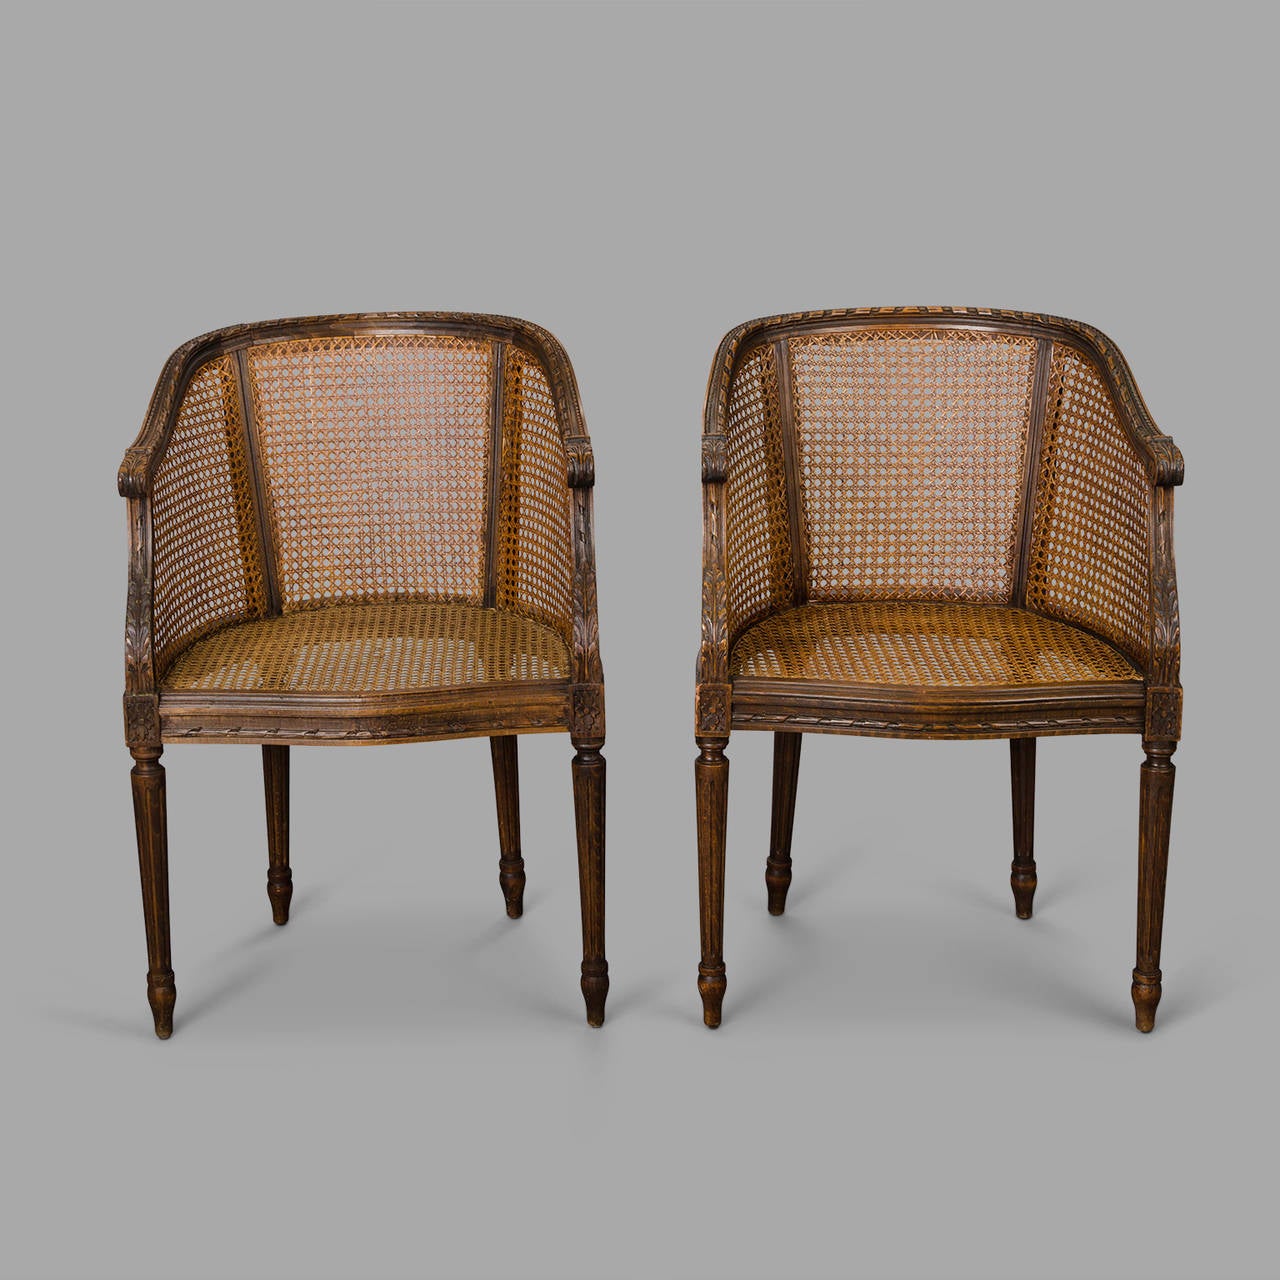 Wood Pair of End of 19th Century Wicker Armchairs in the Louis XVI Style